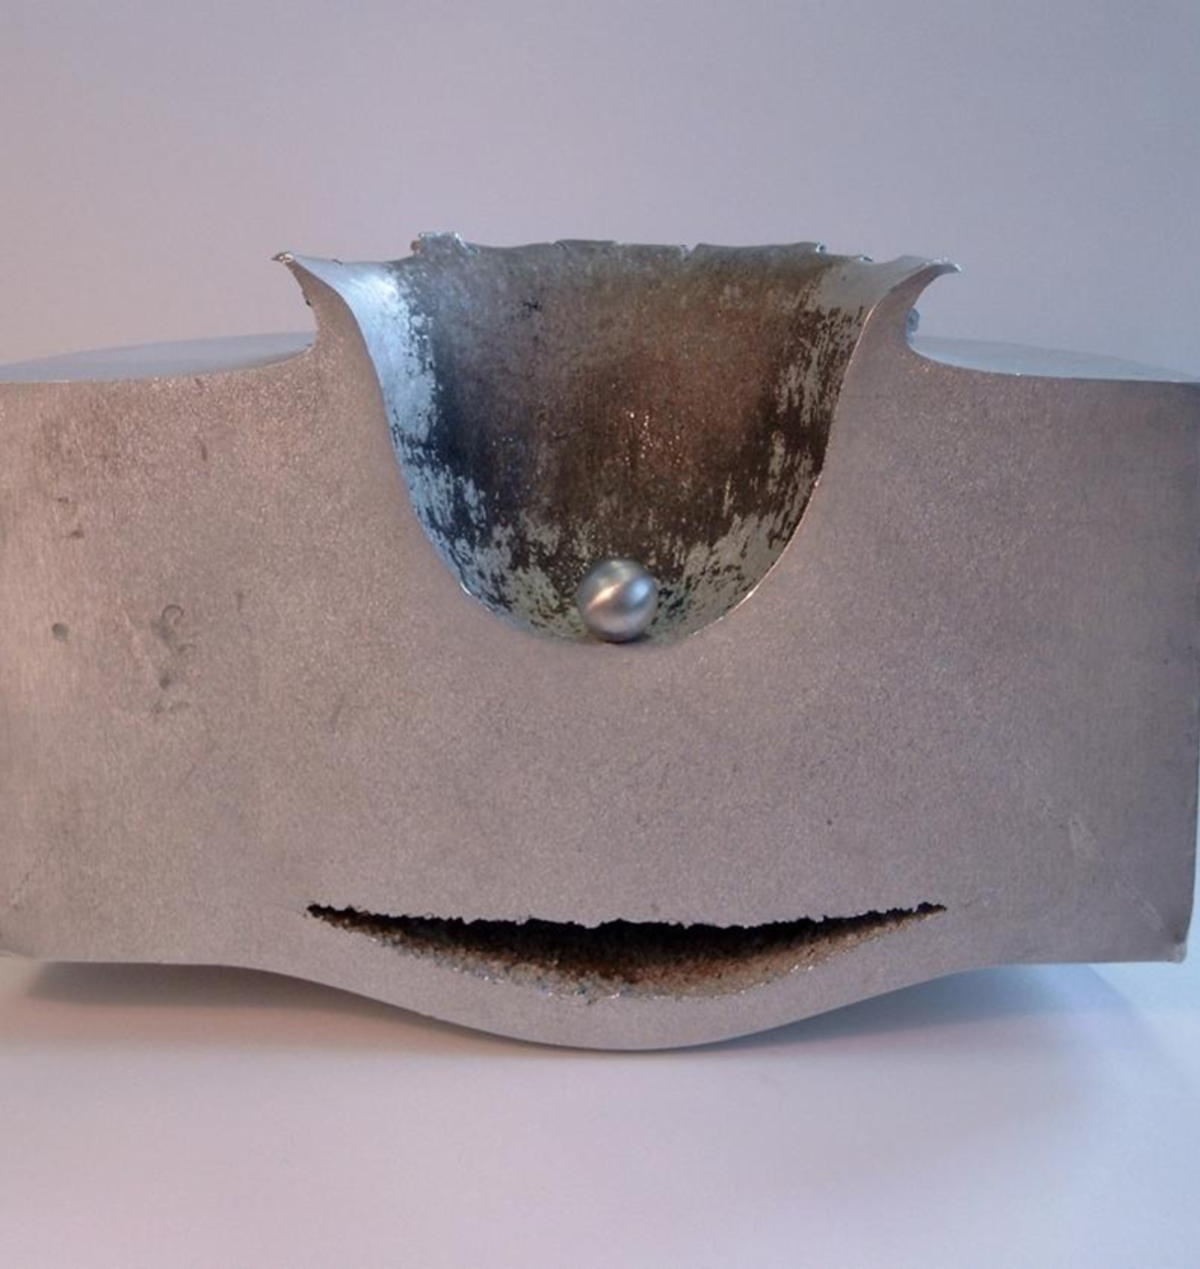 This image shows the results of a lab test impact between a small sphere of aluminum travelling at approximately 6.8 km/second and a block of aluminum 18 cm thick.